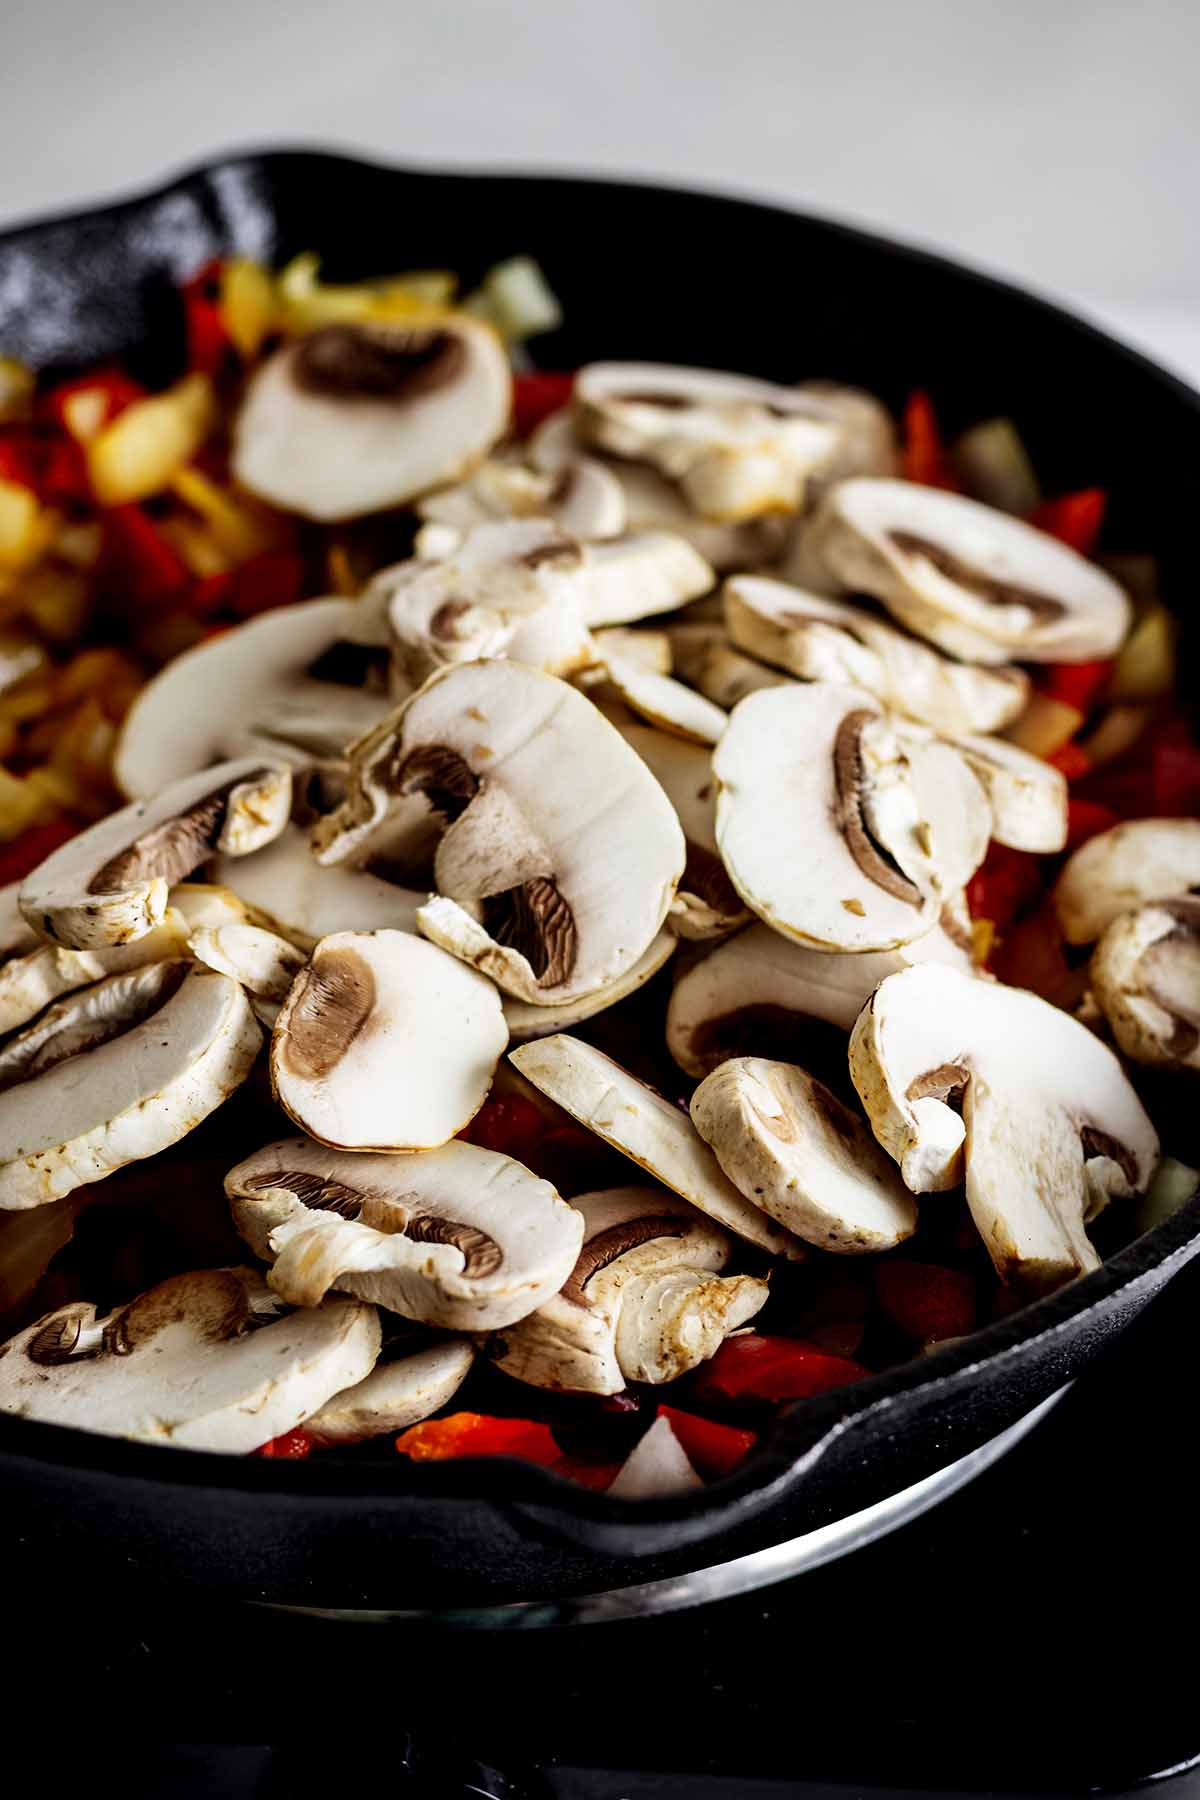 Mushrooms, red pepper and onions cooking in a skillet